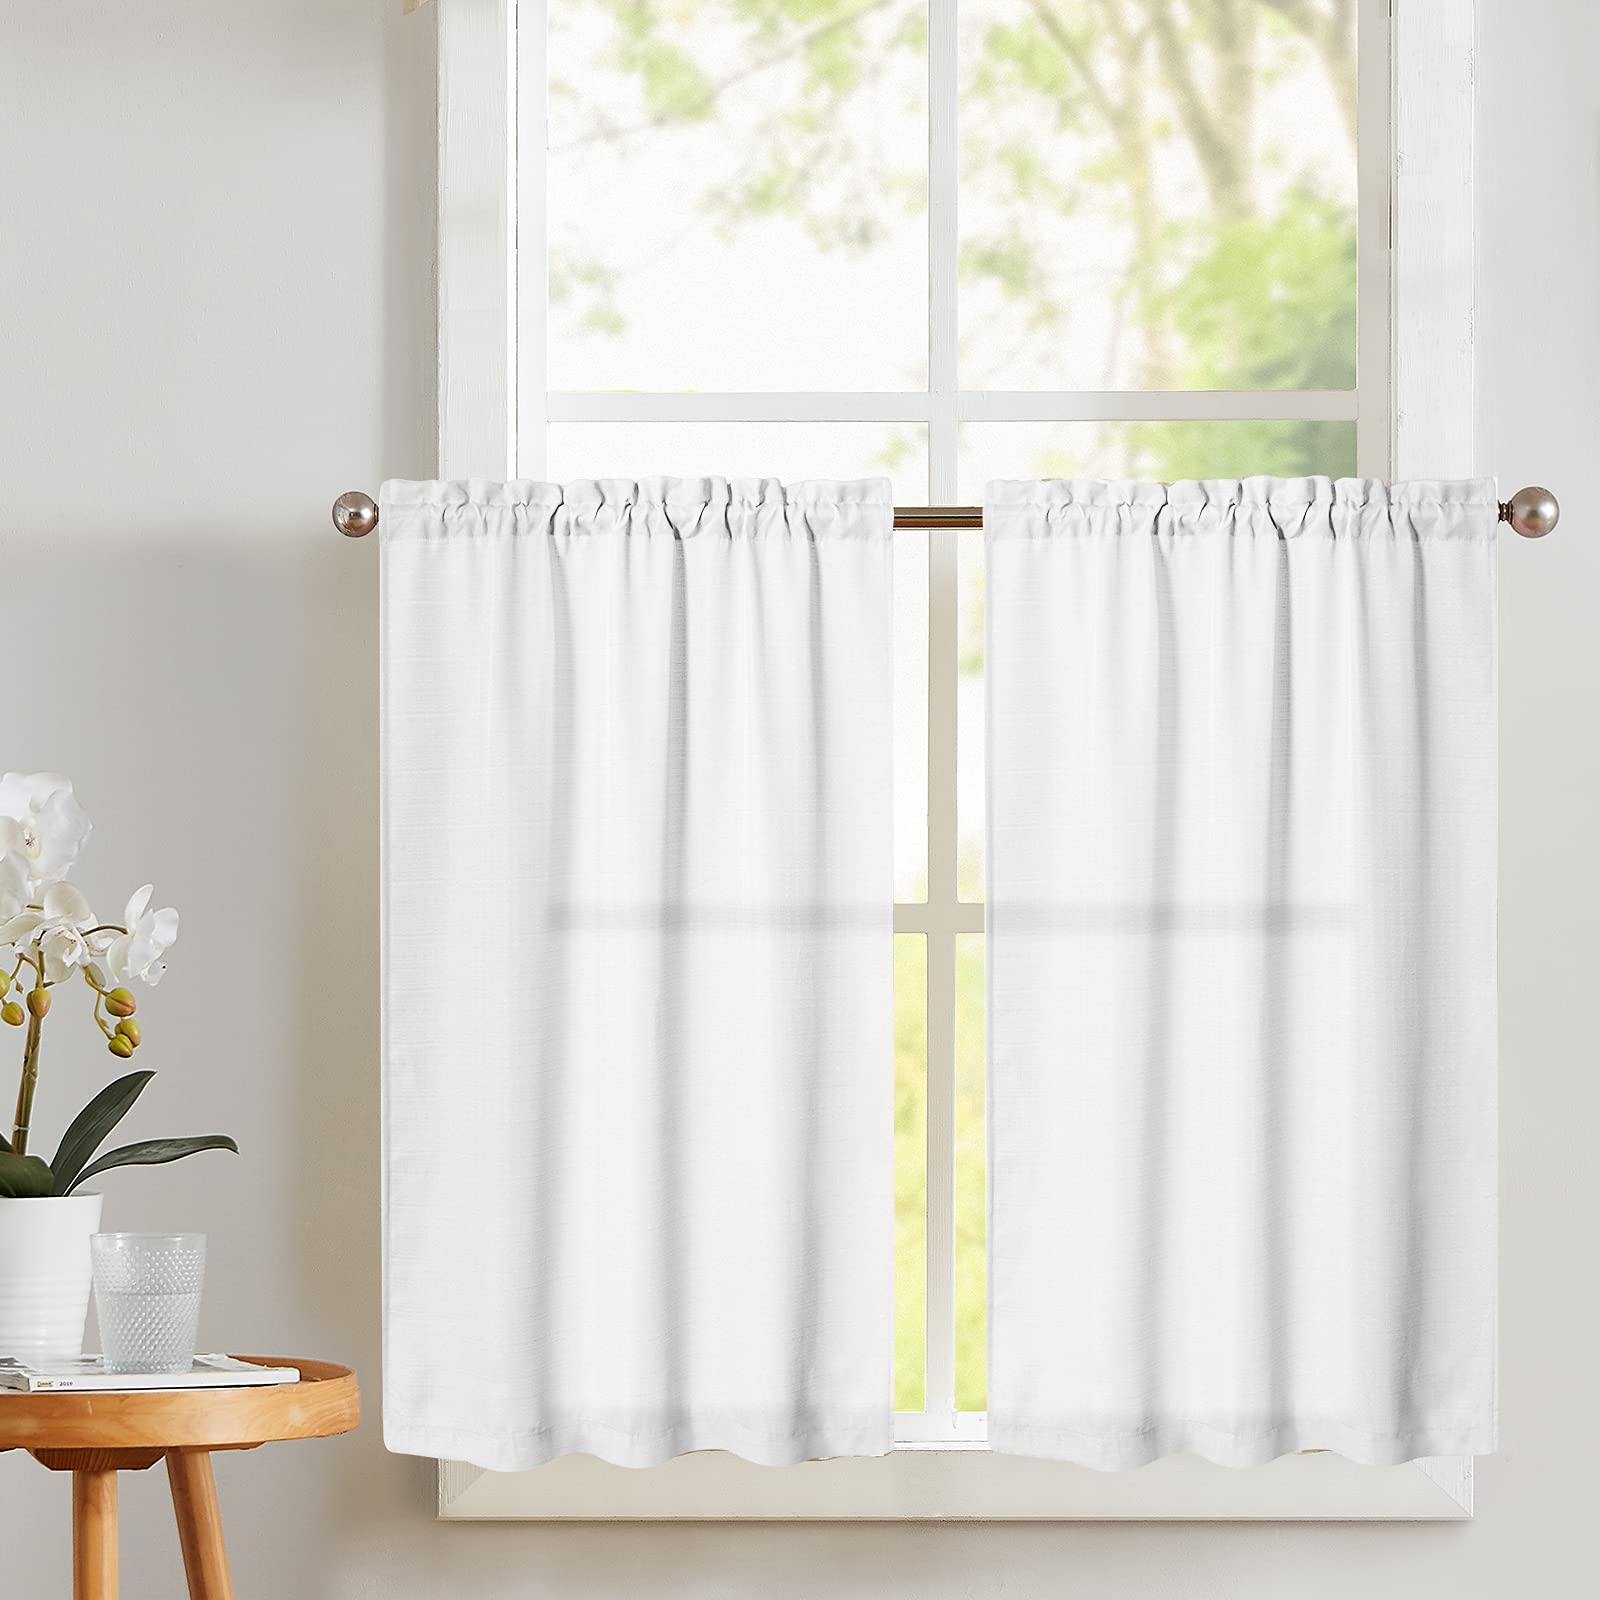 Book Cover Vangao White Kitchen Curtains 24 Inch Length Casual Weave Textured Cafe Curtain Semi Sheer Short Curtain for Bathroom Bedroom Tier Curtains Rod Pocket Half Window Curtain 2 Panels W34 x L24 White